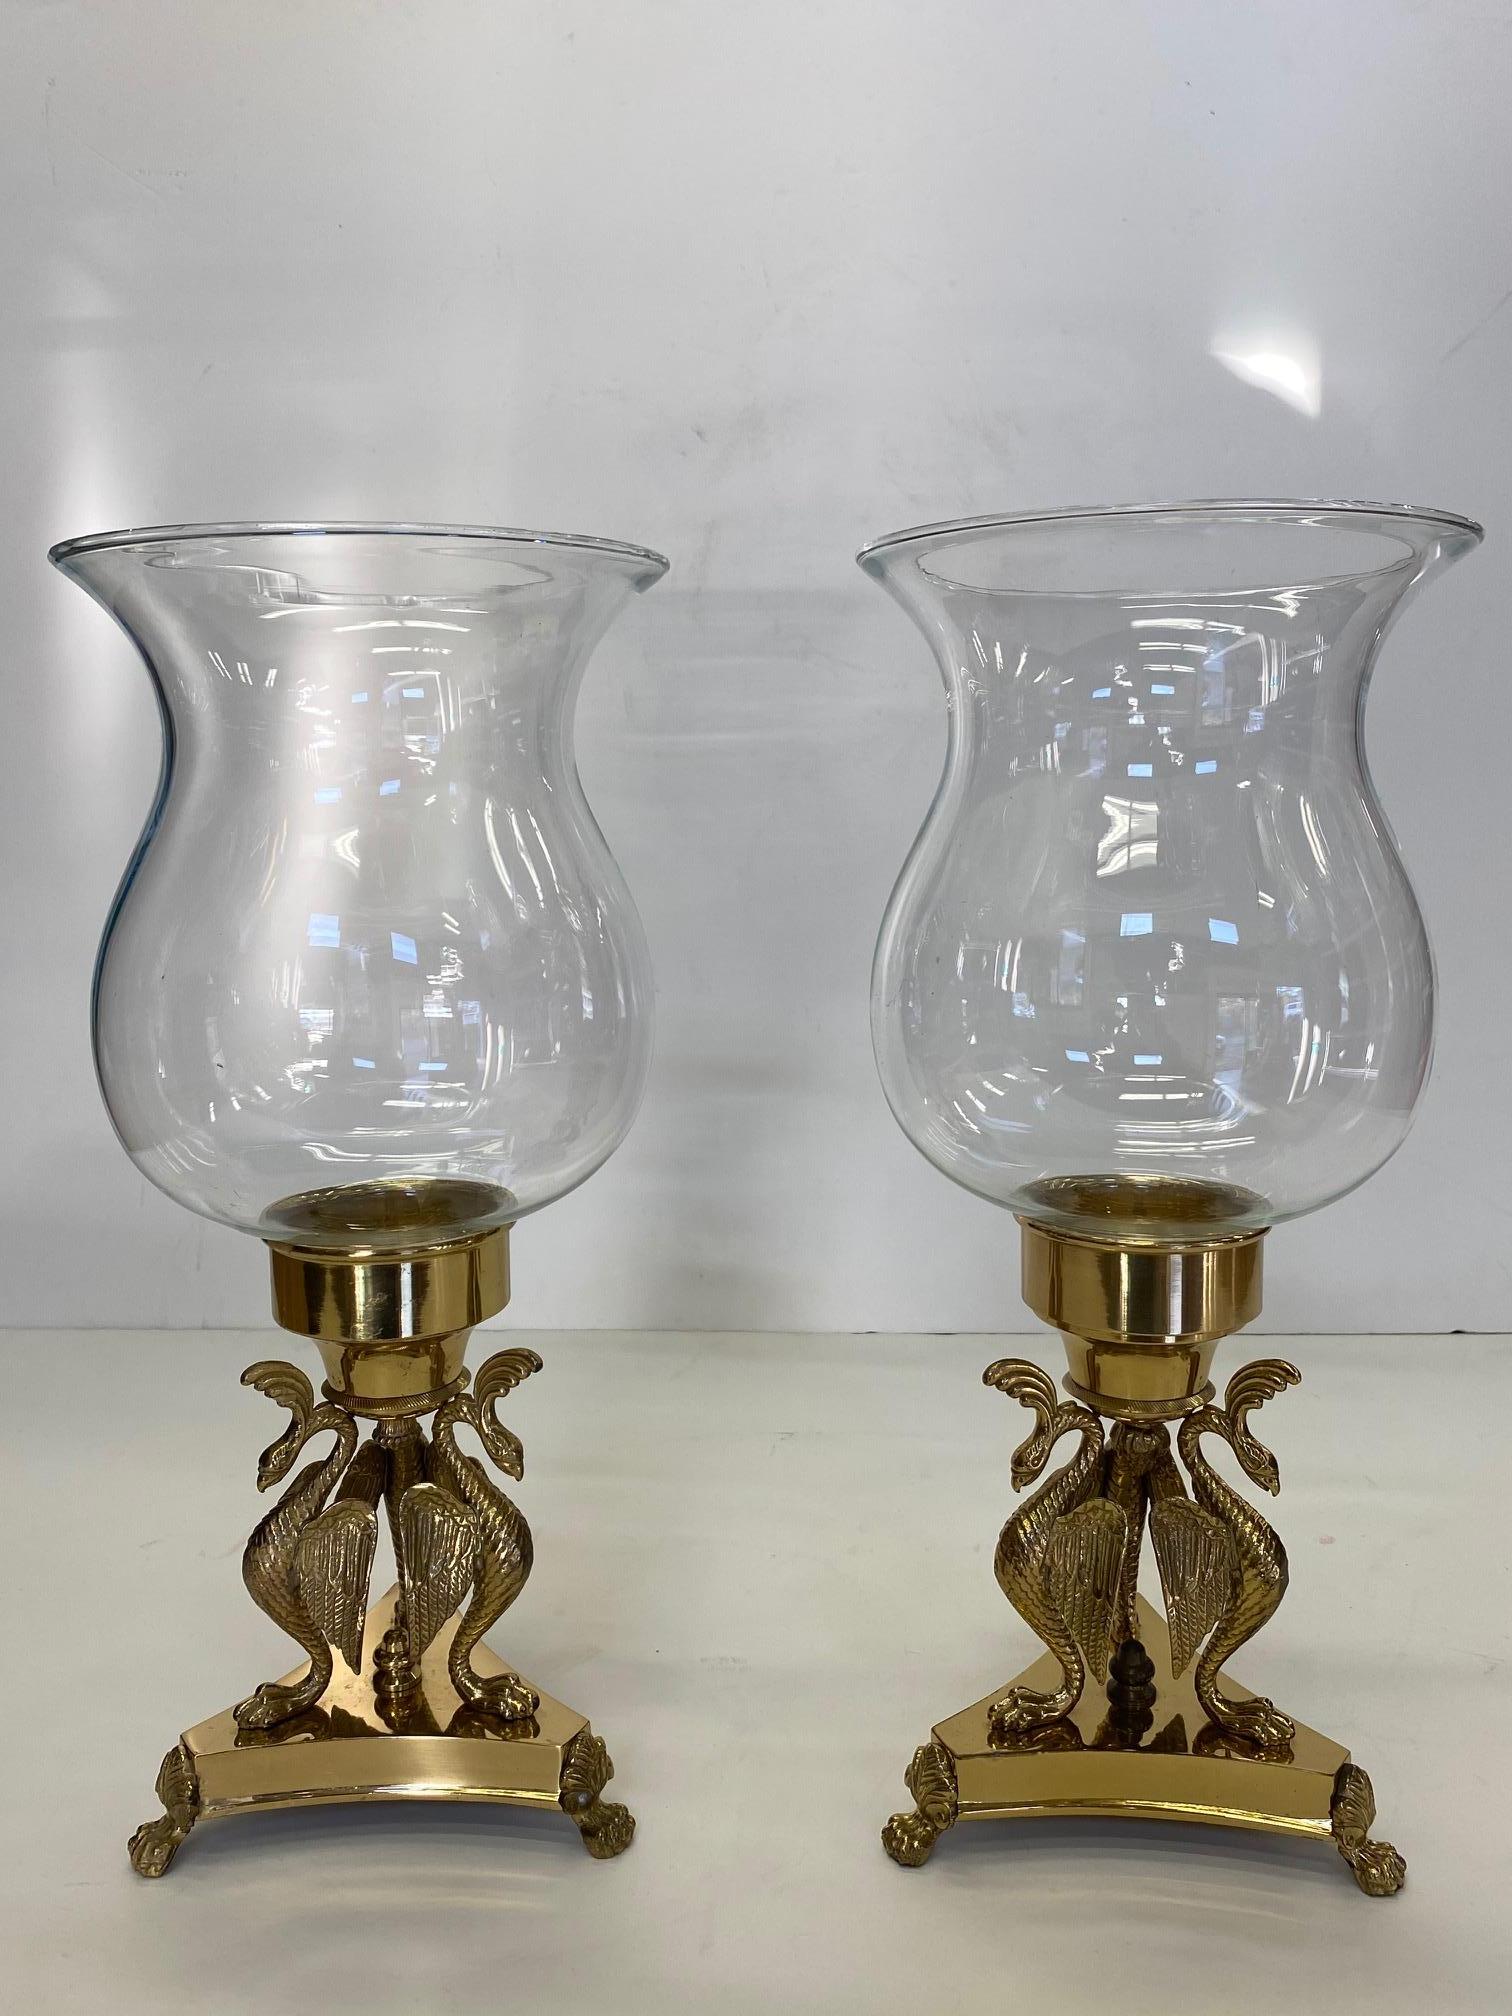 Elegant Pair of Brass & Blown Glass Hurricanes with Birds For Sale 3